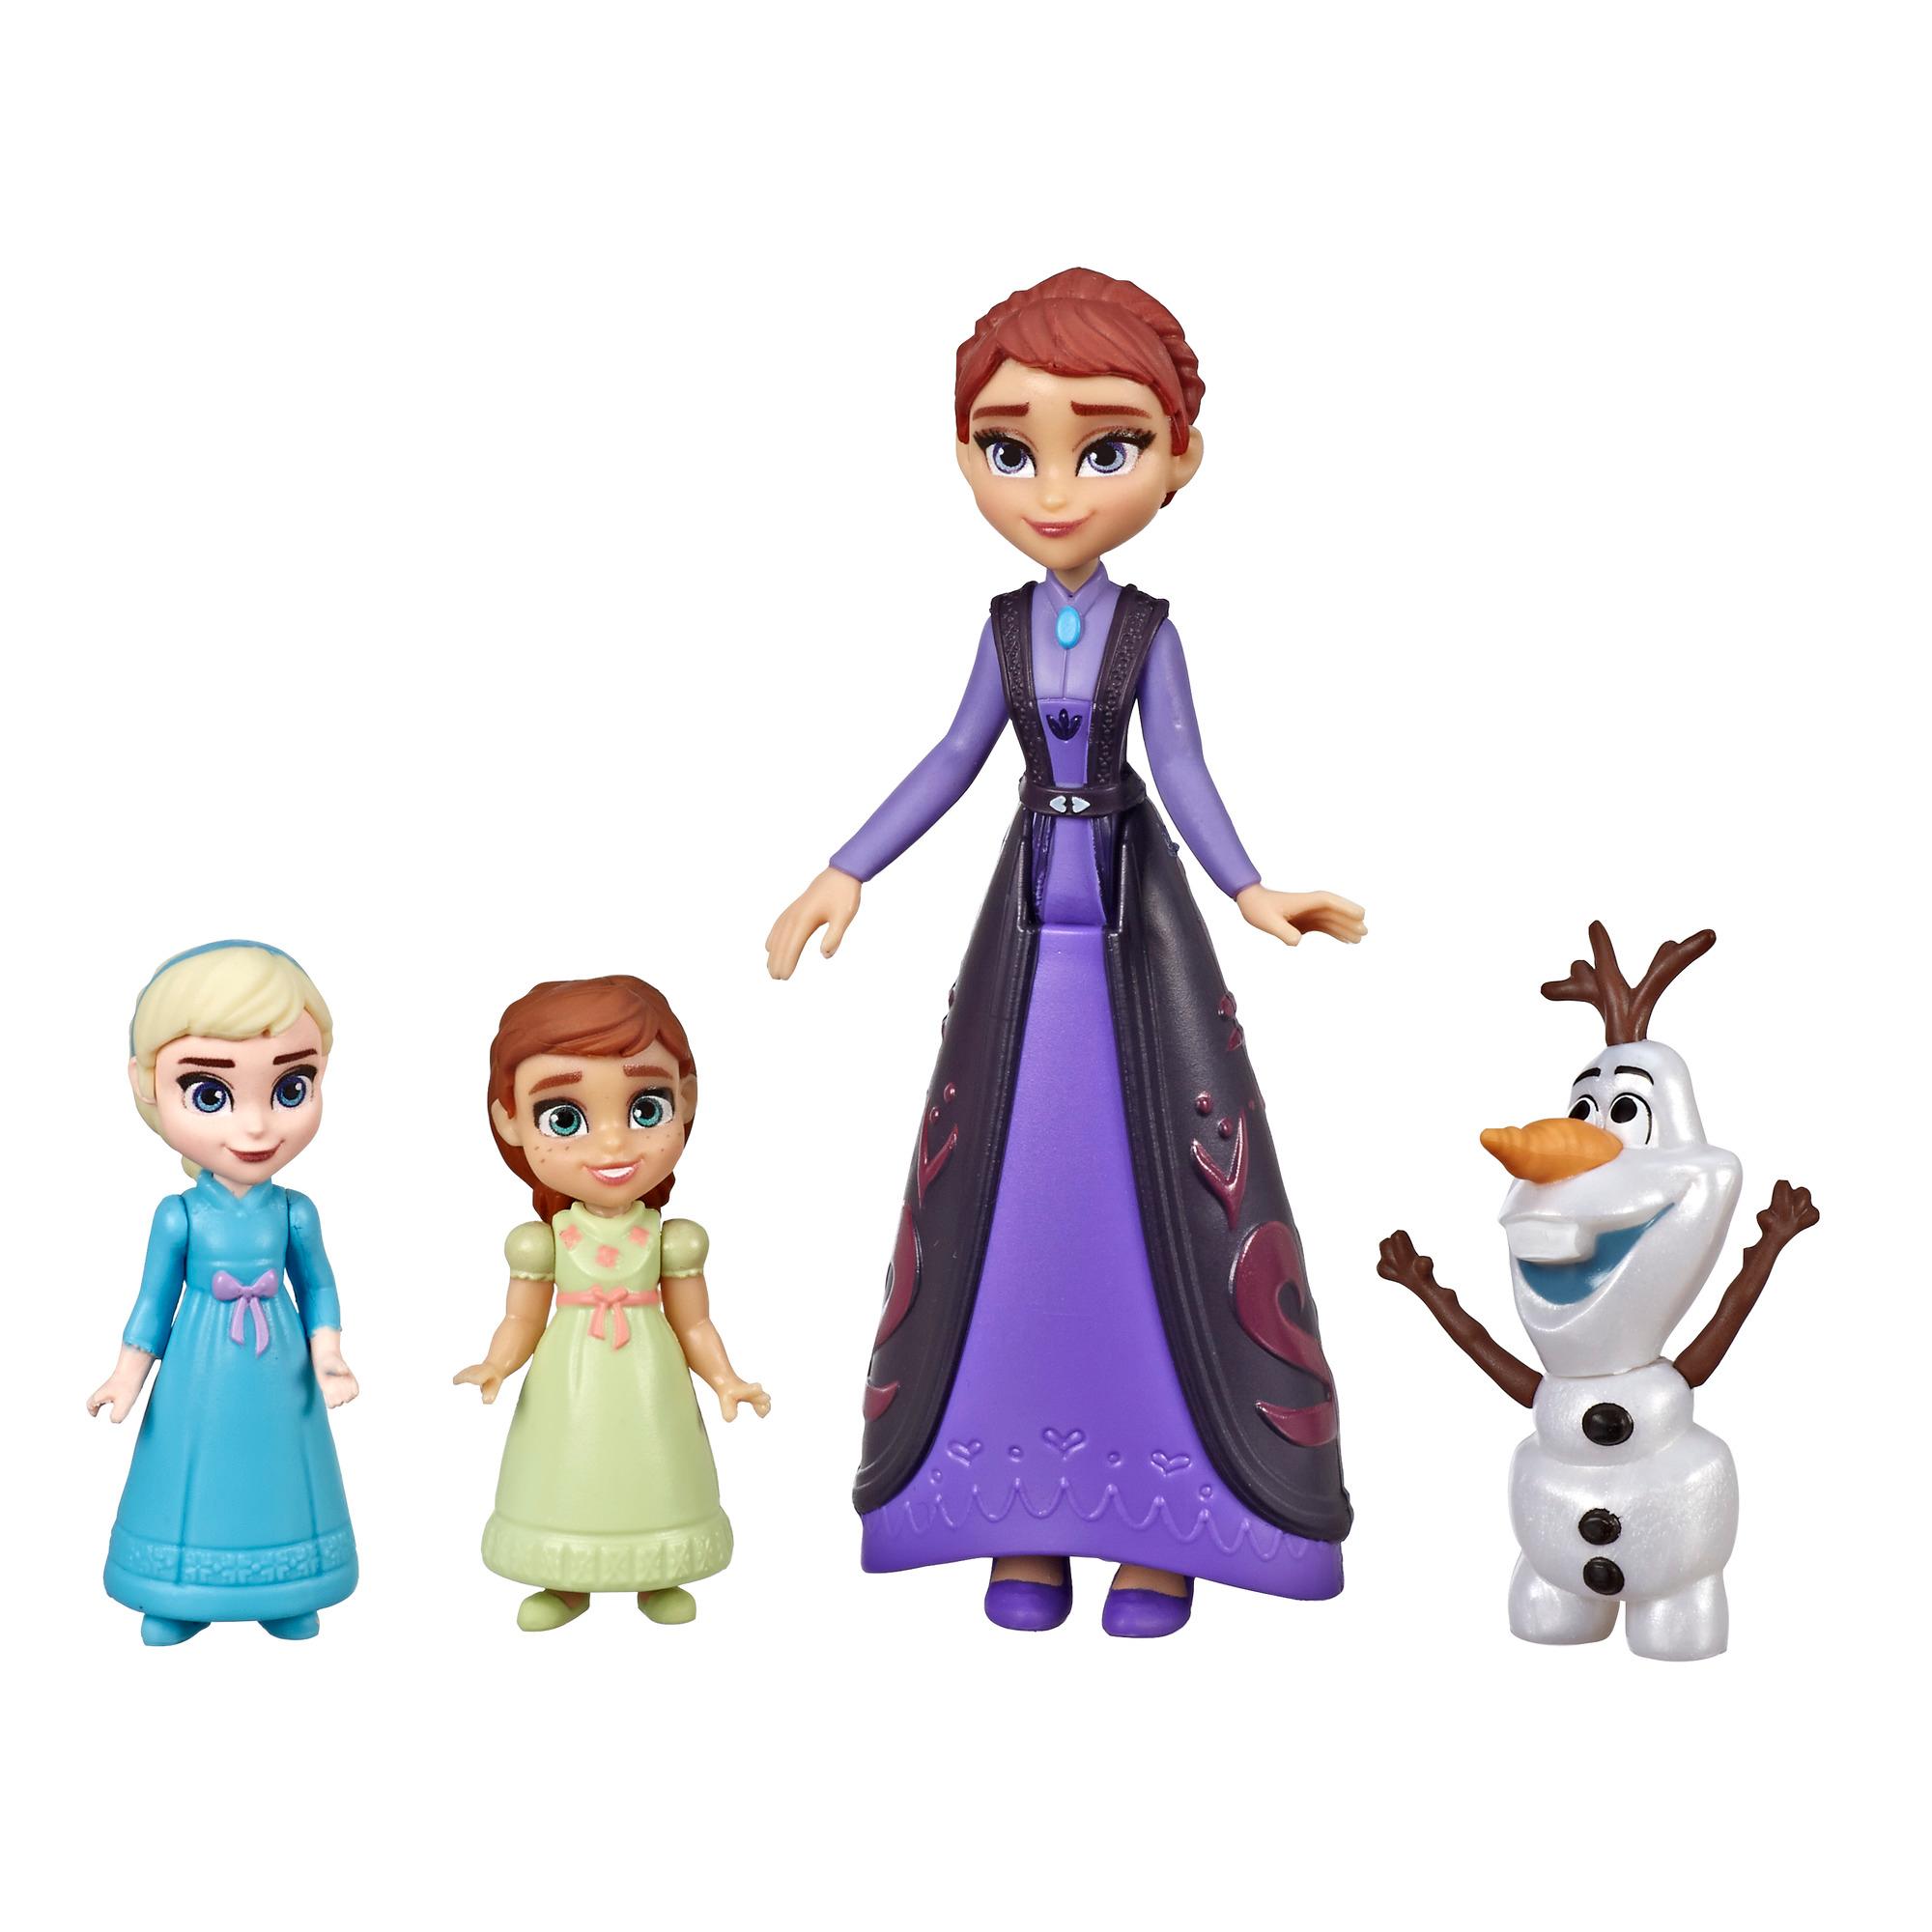 Disney E6661ax0 Frozen 2 Anna Doll With Buildable Olaf Figure and Backpack for sale online 